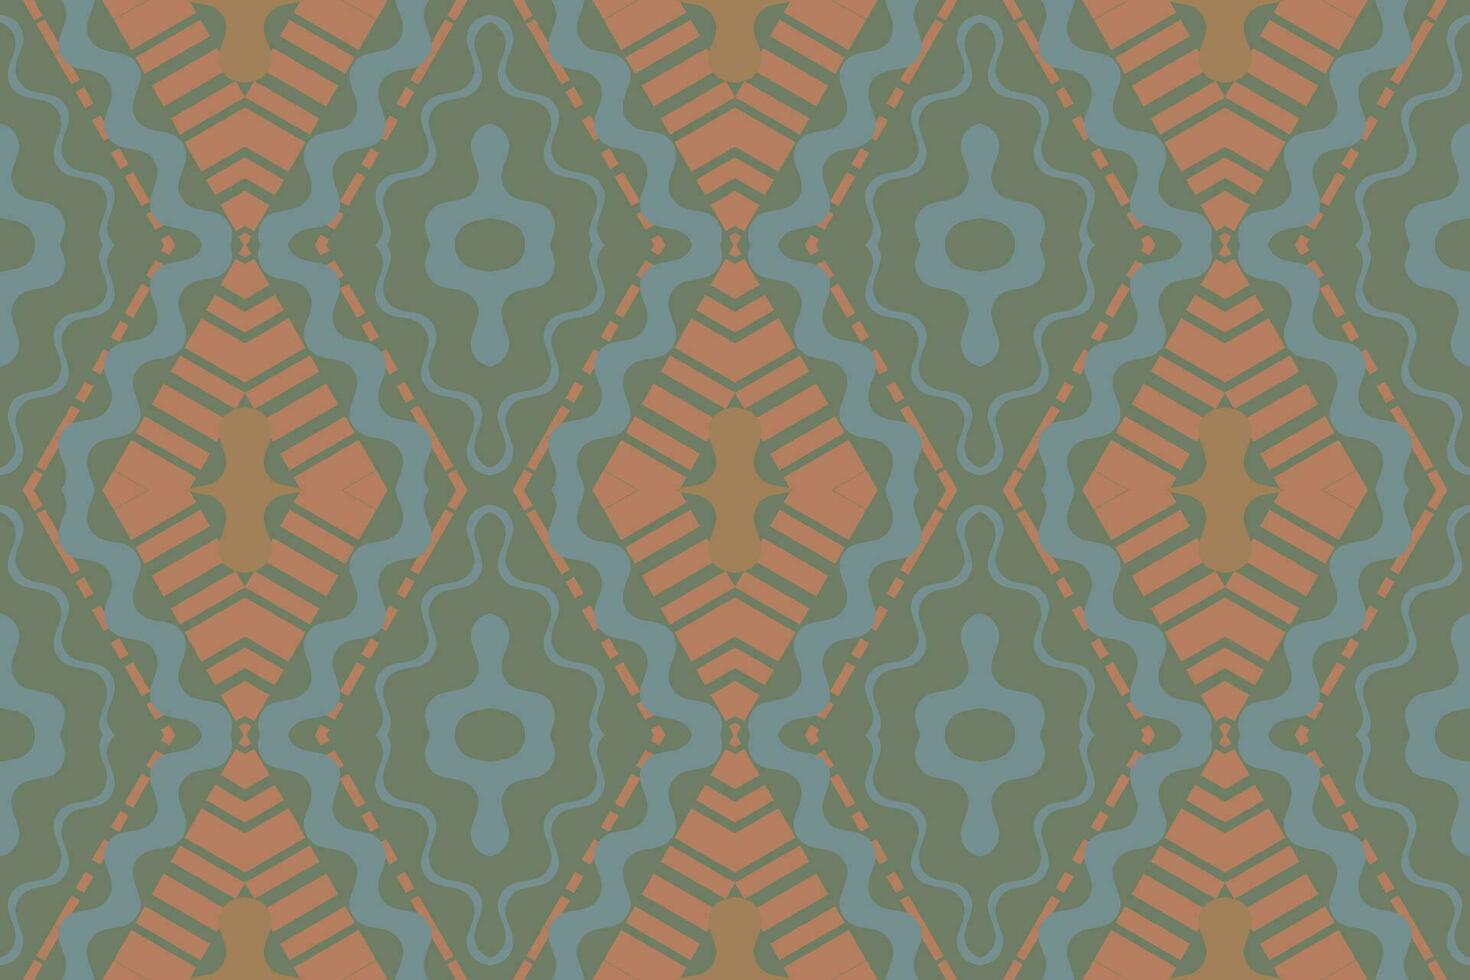 Ikat Floral Paisley Embroidery Background. Ikat Vector Geometric Ethnic Oriental Pattern traditional.aztec Style Abstract Vector illustration.design for Texture,fabric,clothing,wrapping,sarong.